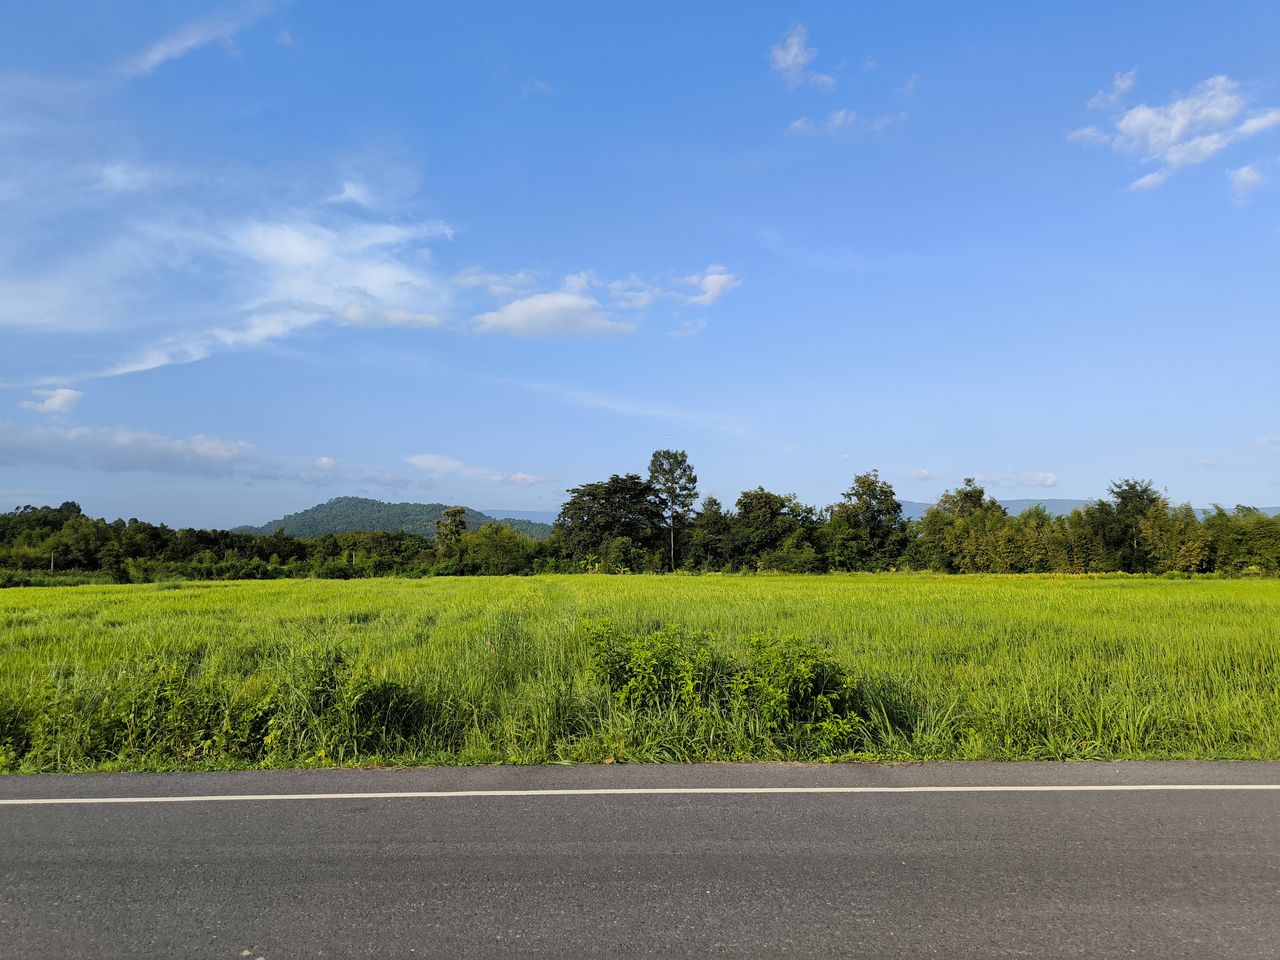 plant, sky, horizon, landscape, tree, road, environment, grass, cloud, land, nature, field, no people, rural scene, plain, scenics - nature, green, beauty in nature, transportation, blue, rural area, tranquility, agriculture, day, hill, growth, outdoors, tranquil scene, highway, prairie, non-urban scene, grassland, travel, crop, natural environment